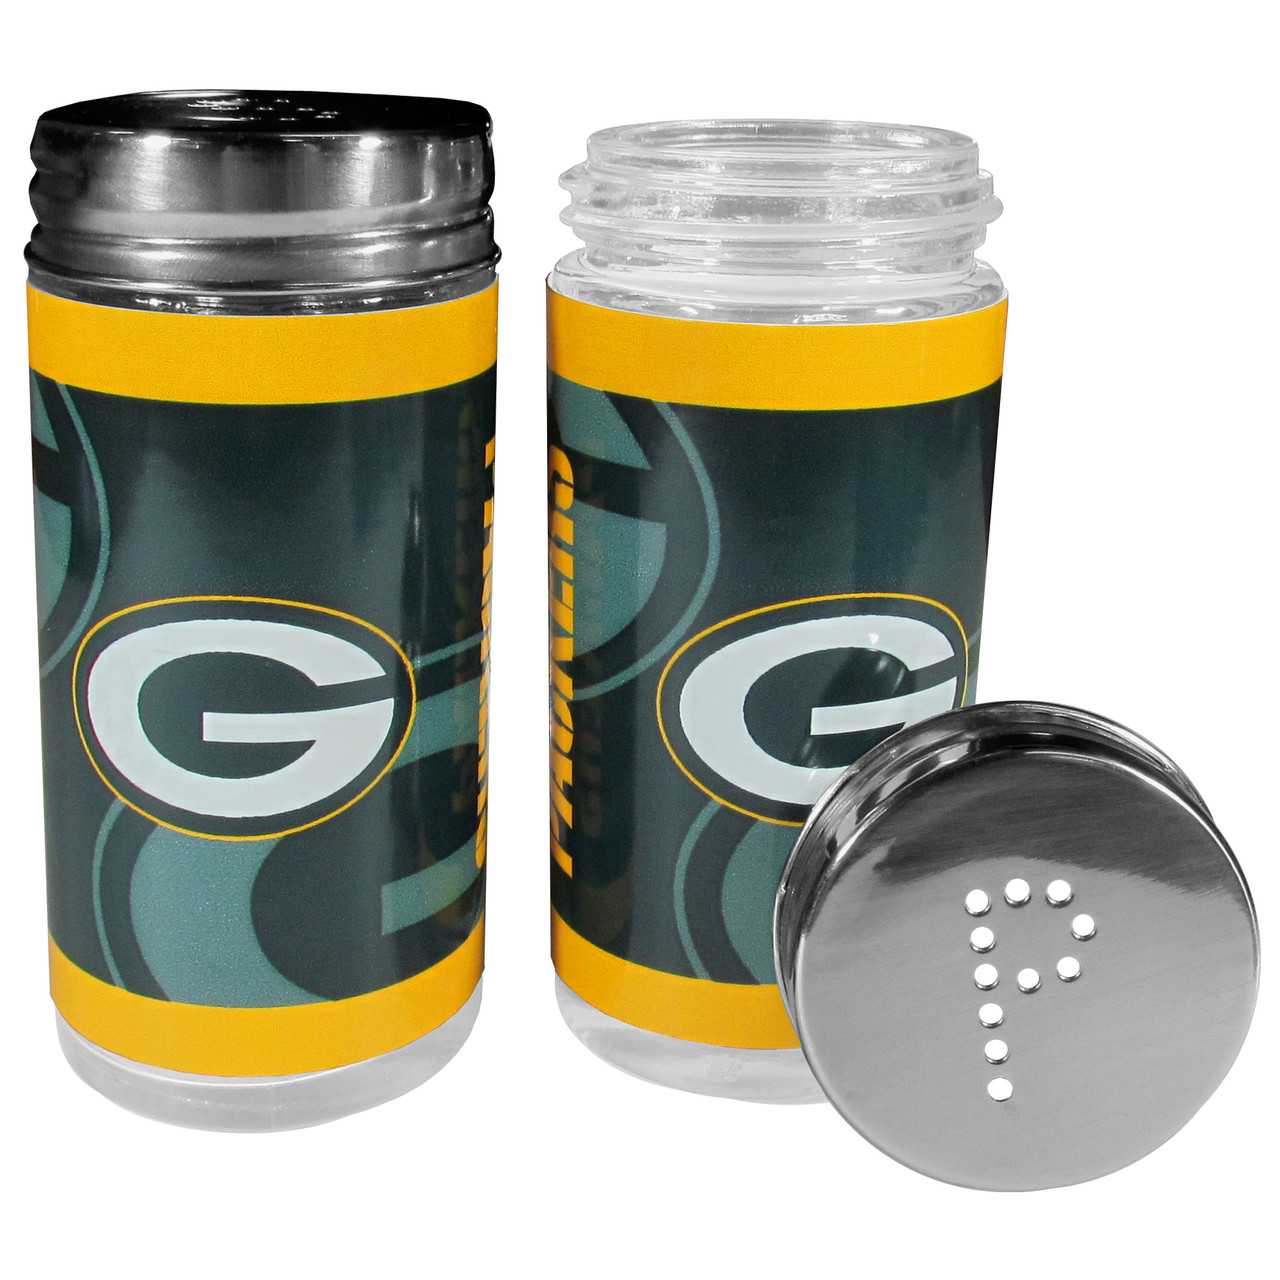 Siskiyou Green Bay Packers Salt and Pepper Shakers Tailgater